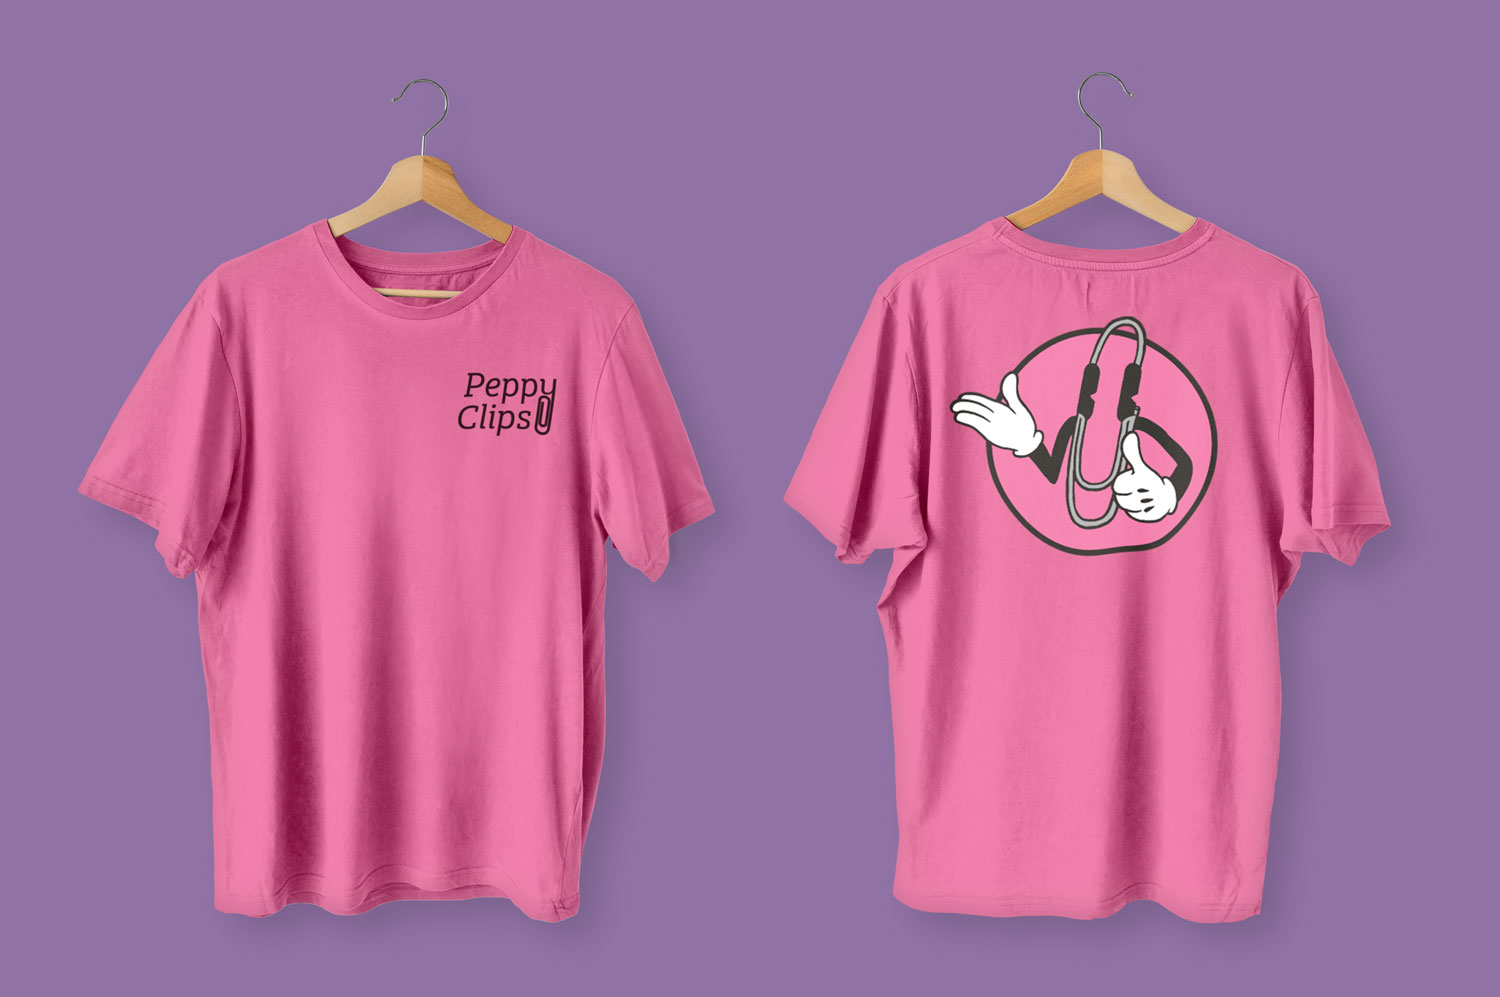 Peppy Clips pink shirt